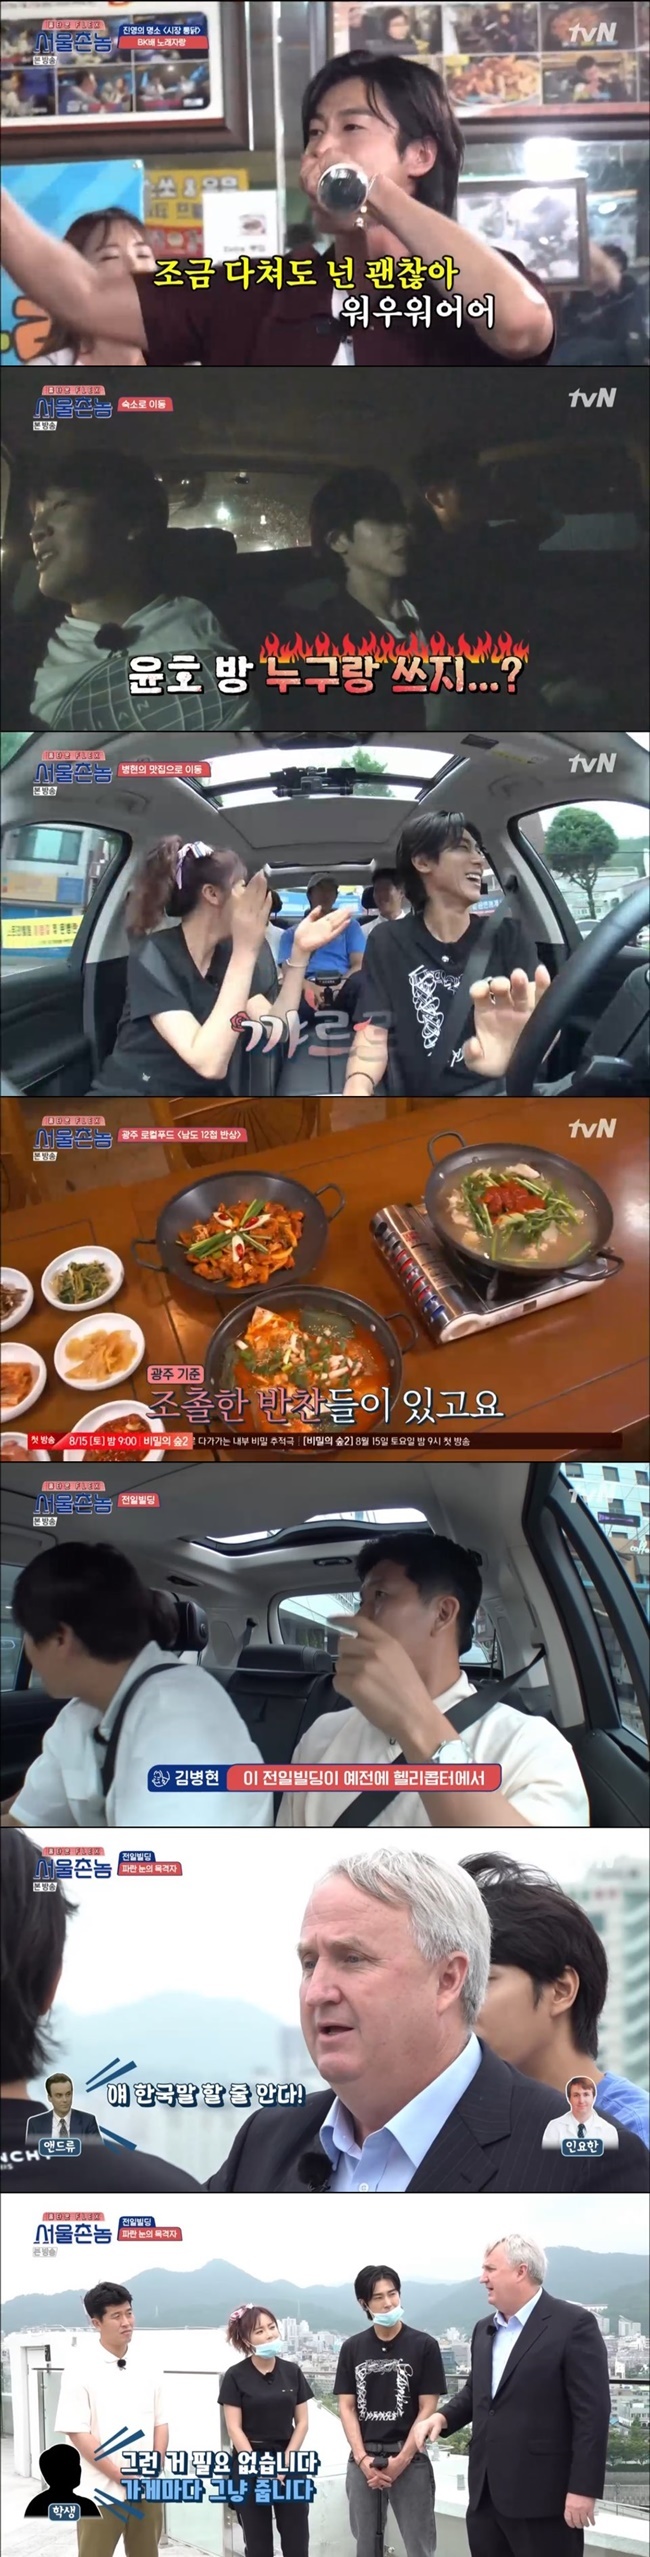 Hong Jin-young, Kim Byung-hyun and Yunho gave fun and impression on the Gwangju tour.In TVN Hometown Flex  episode 4, Gwangju Village Yunho, Hong Jin-young, Kim Byung-hyun and Seoul Village Cha Tae-hyun, Lee Seung-gis Jeolla Province Gwangju tour followed.The members started the BK ship song boasting in search of the Hong Jin-young attraction Market Chicken.Following the opening of Lee Seung-gi and Cha Tae-hyun, Yunho selected the TVXQ hit Order, and Cha Tae-hyun exploded and laughed, saying, I have a second-lane bridge.Yunhos heats scored a sad 85 points and made a fuss because he could not pass the record of Cha Tae-hyun.Those who spent a long time together concluded Haru, who left everyone horrified by the saying Its the beginning now.In the meantime, he said, Lets look back on Haru today. He briefed himself and caused everyone to sleep.At that time, Hong Jin-young asked, Who do you use a room with? Lee Seung-gi quickly stepped out, saying, I am not.In the end, Lee Seung-gi was the person who shared the room with Yunho, and Lee Seung-gi was laughing, pleading, I like all the good things, but lets do all the good stories here.After the honey-sleeping, the members started the second day of their trip to Gwangju; Kim Byung-hyuns restaurant added to the expectation with a local restaurant that Yunho also knew.Yunho expressed regret and said, I feel sorry for one night and two days.If you are sorry, lets catch Haru more, Cha Tae-hyun said, At this point, Hometown Flex  seems to be the goal of getting tired and not being able to come here. Kim Byung-hyun had members India for the 12th South Island half-size local restaurant; it couldnt just give them food.Last night, the members who wrote their necks in karaoke were sighing at the morning song boast.The sigh was also briefly immersed in the game, Hometown Flex team used Daegu Tang, and Gwangju local team used stir-fried meat.Hong Jin-young was immersed in the taste of the fish, and Lee Seung-gi, who ate the cod soup, admired it as it is really delicious to not eat fish stew well.In addition, he visited Chungjangro, which symbolizes Gwangju youth. Yunho recalled his past memories, saying, It is a post office where we gathered.In Chungjangro, Hong Jin-young was the most delicious bakery in Gwangju, and India members; Yunho found dinosaur eggs as soon as he entered the bakery.Hong Jin-young and Yunho showed a excited face as the most eaten bread in their childhood.InJohn was angry at the news that the singer was coming late at the event and waited to see his face.The singer said Hong Jin-young was embarrassed by Hong Jin-young.In the meantime, John said, Hong Jin-young came to tear the stage with Battery of Love.I became a fan from that time, he said warmly, and Hong Jin-young said he was sorry that he had only five schedules at the time.Kim Byung-hyun, Yunho, and Hong Jin-young gathered their mouths and found a restaurant in Dongas, a restaurant in Chungjangro.Hong Jin-young, who visited the restaurant for a long time, said, It used to look like a Kyungyang house.In order to save memories, the production team gave the menu to the members in the past.Yunho said that the soup before Dongas was a specialty of the house, and Hong Jin-young told her about her school days when she was engaged in a charm operation to receive soup infinite refills.Yunho said, There were a lot of family members, but there were a lot of women and men. Dongas restaurant was a mecca for the meeting.In fact, I heard the camp here, Hong Jin-young said. It was not bad in that school days.When I came out of the city, my juniors followed me. The next course was the Yunho attraction Mudeungsan; members were displeased with the news of the Mudeungsan mountaineering and Yunho said, It takes a little less than two hours to get to the middle of the year.After the struggle, Lee Seung-gi and Hong Jin-young succeeded in escaping Mudeungsan climbing and bought envy of everyone.